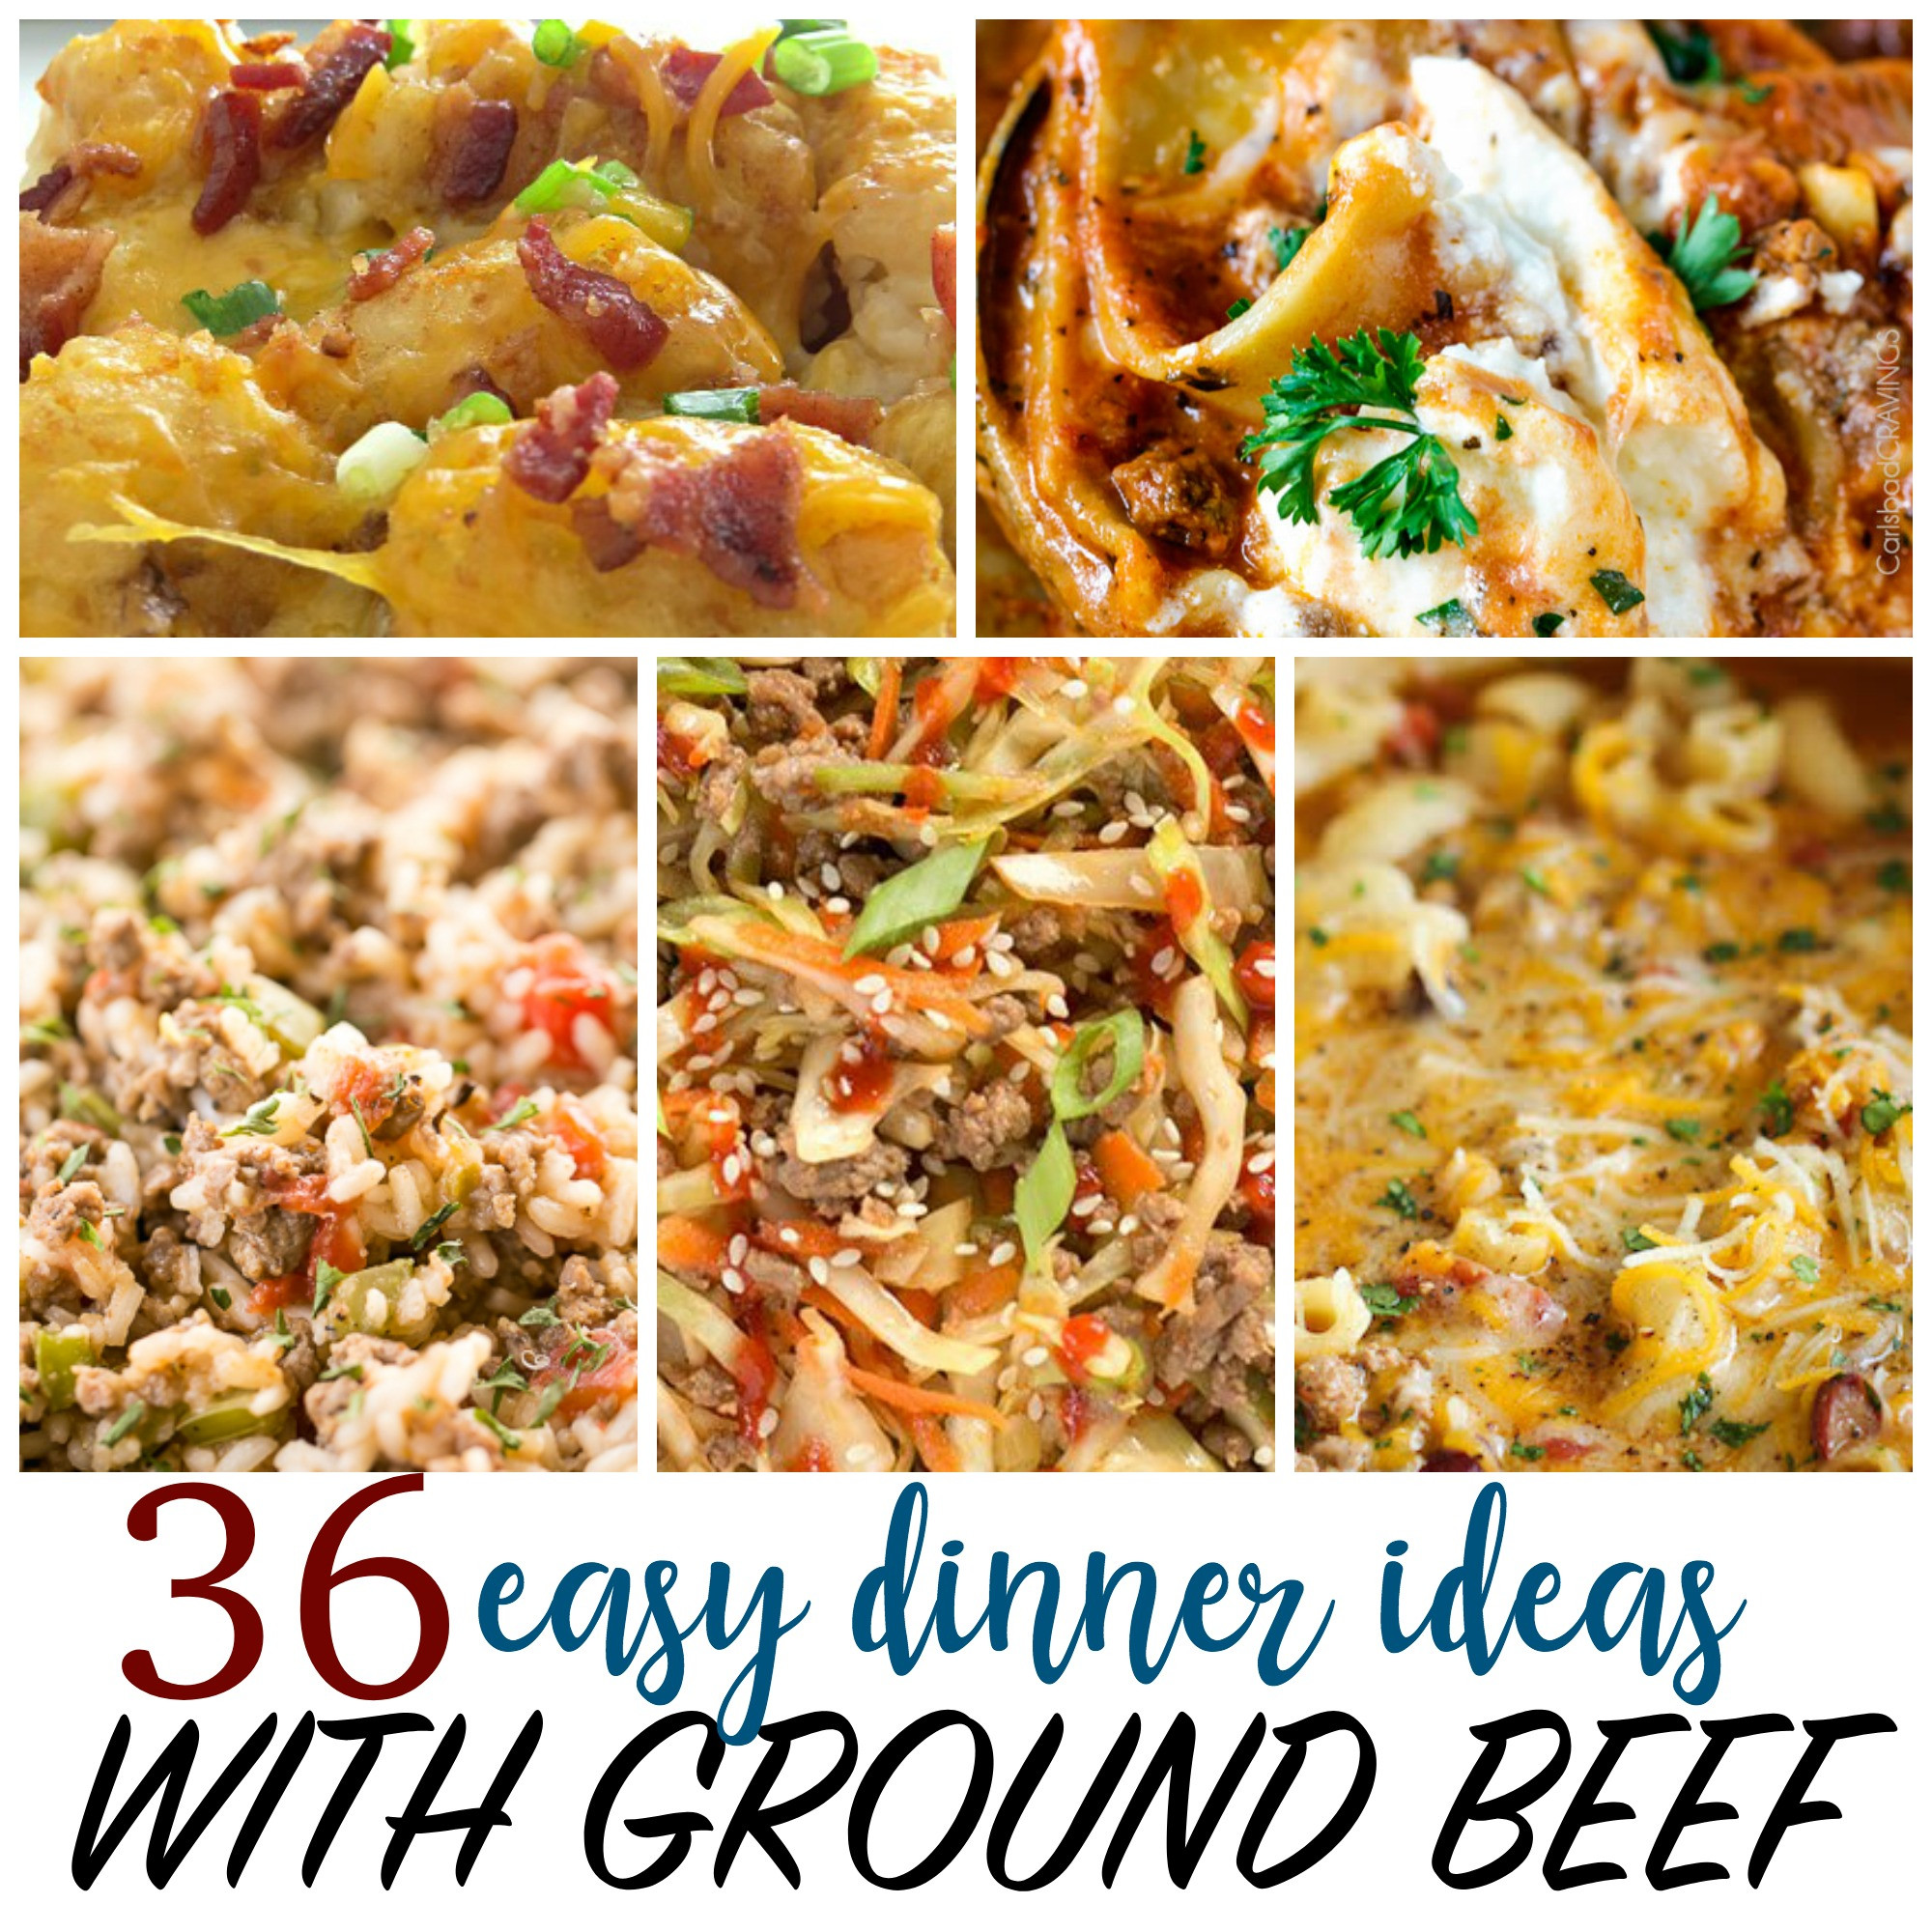 What Can I Make With Ground Beef
 Cheap Recipes 36 Things to Make with Ground Beef